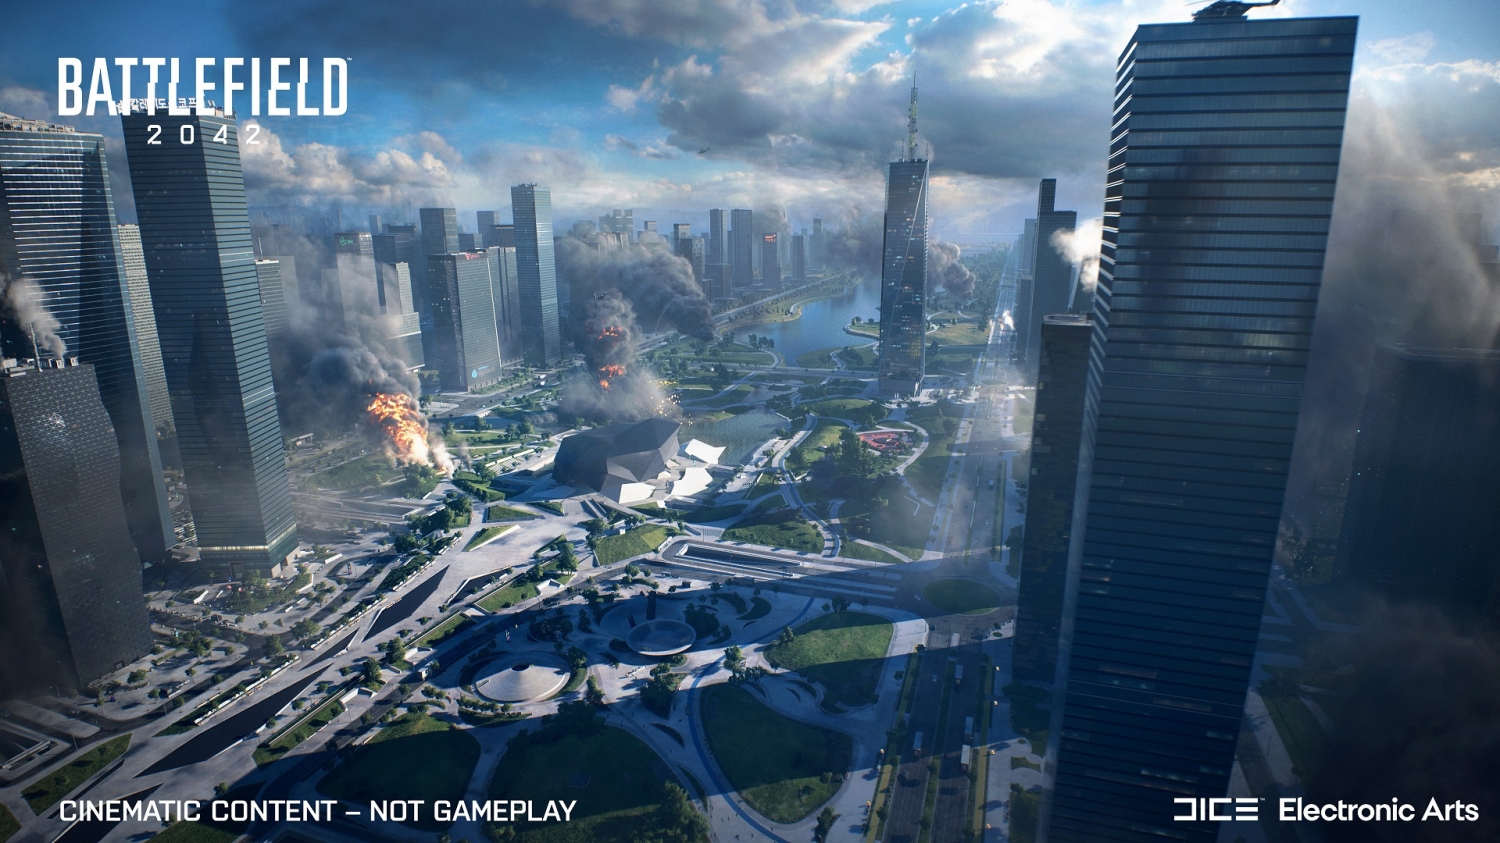 Battlefield 2042 won't support cross-gen cross-play on consoles and PC